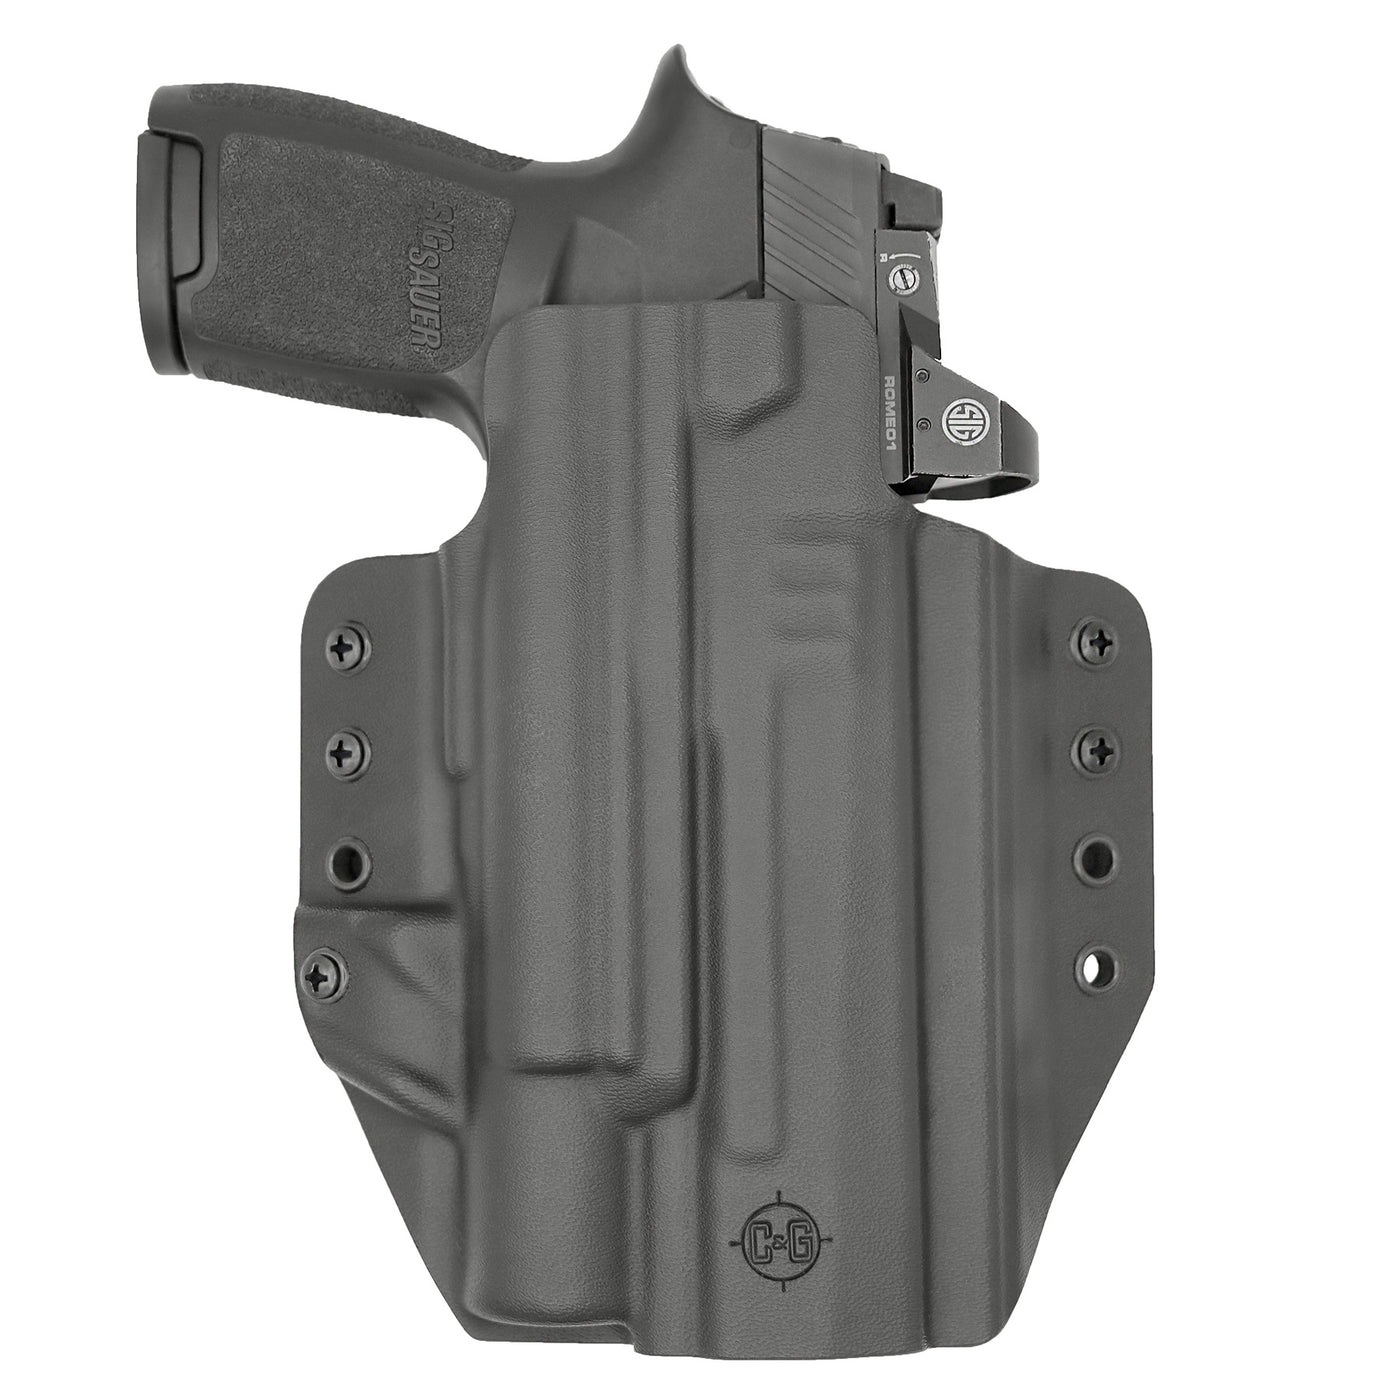 C&G Holsters Custom OWB Tactical H&K 45/c Surefire X300 in holstered position